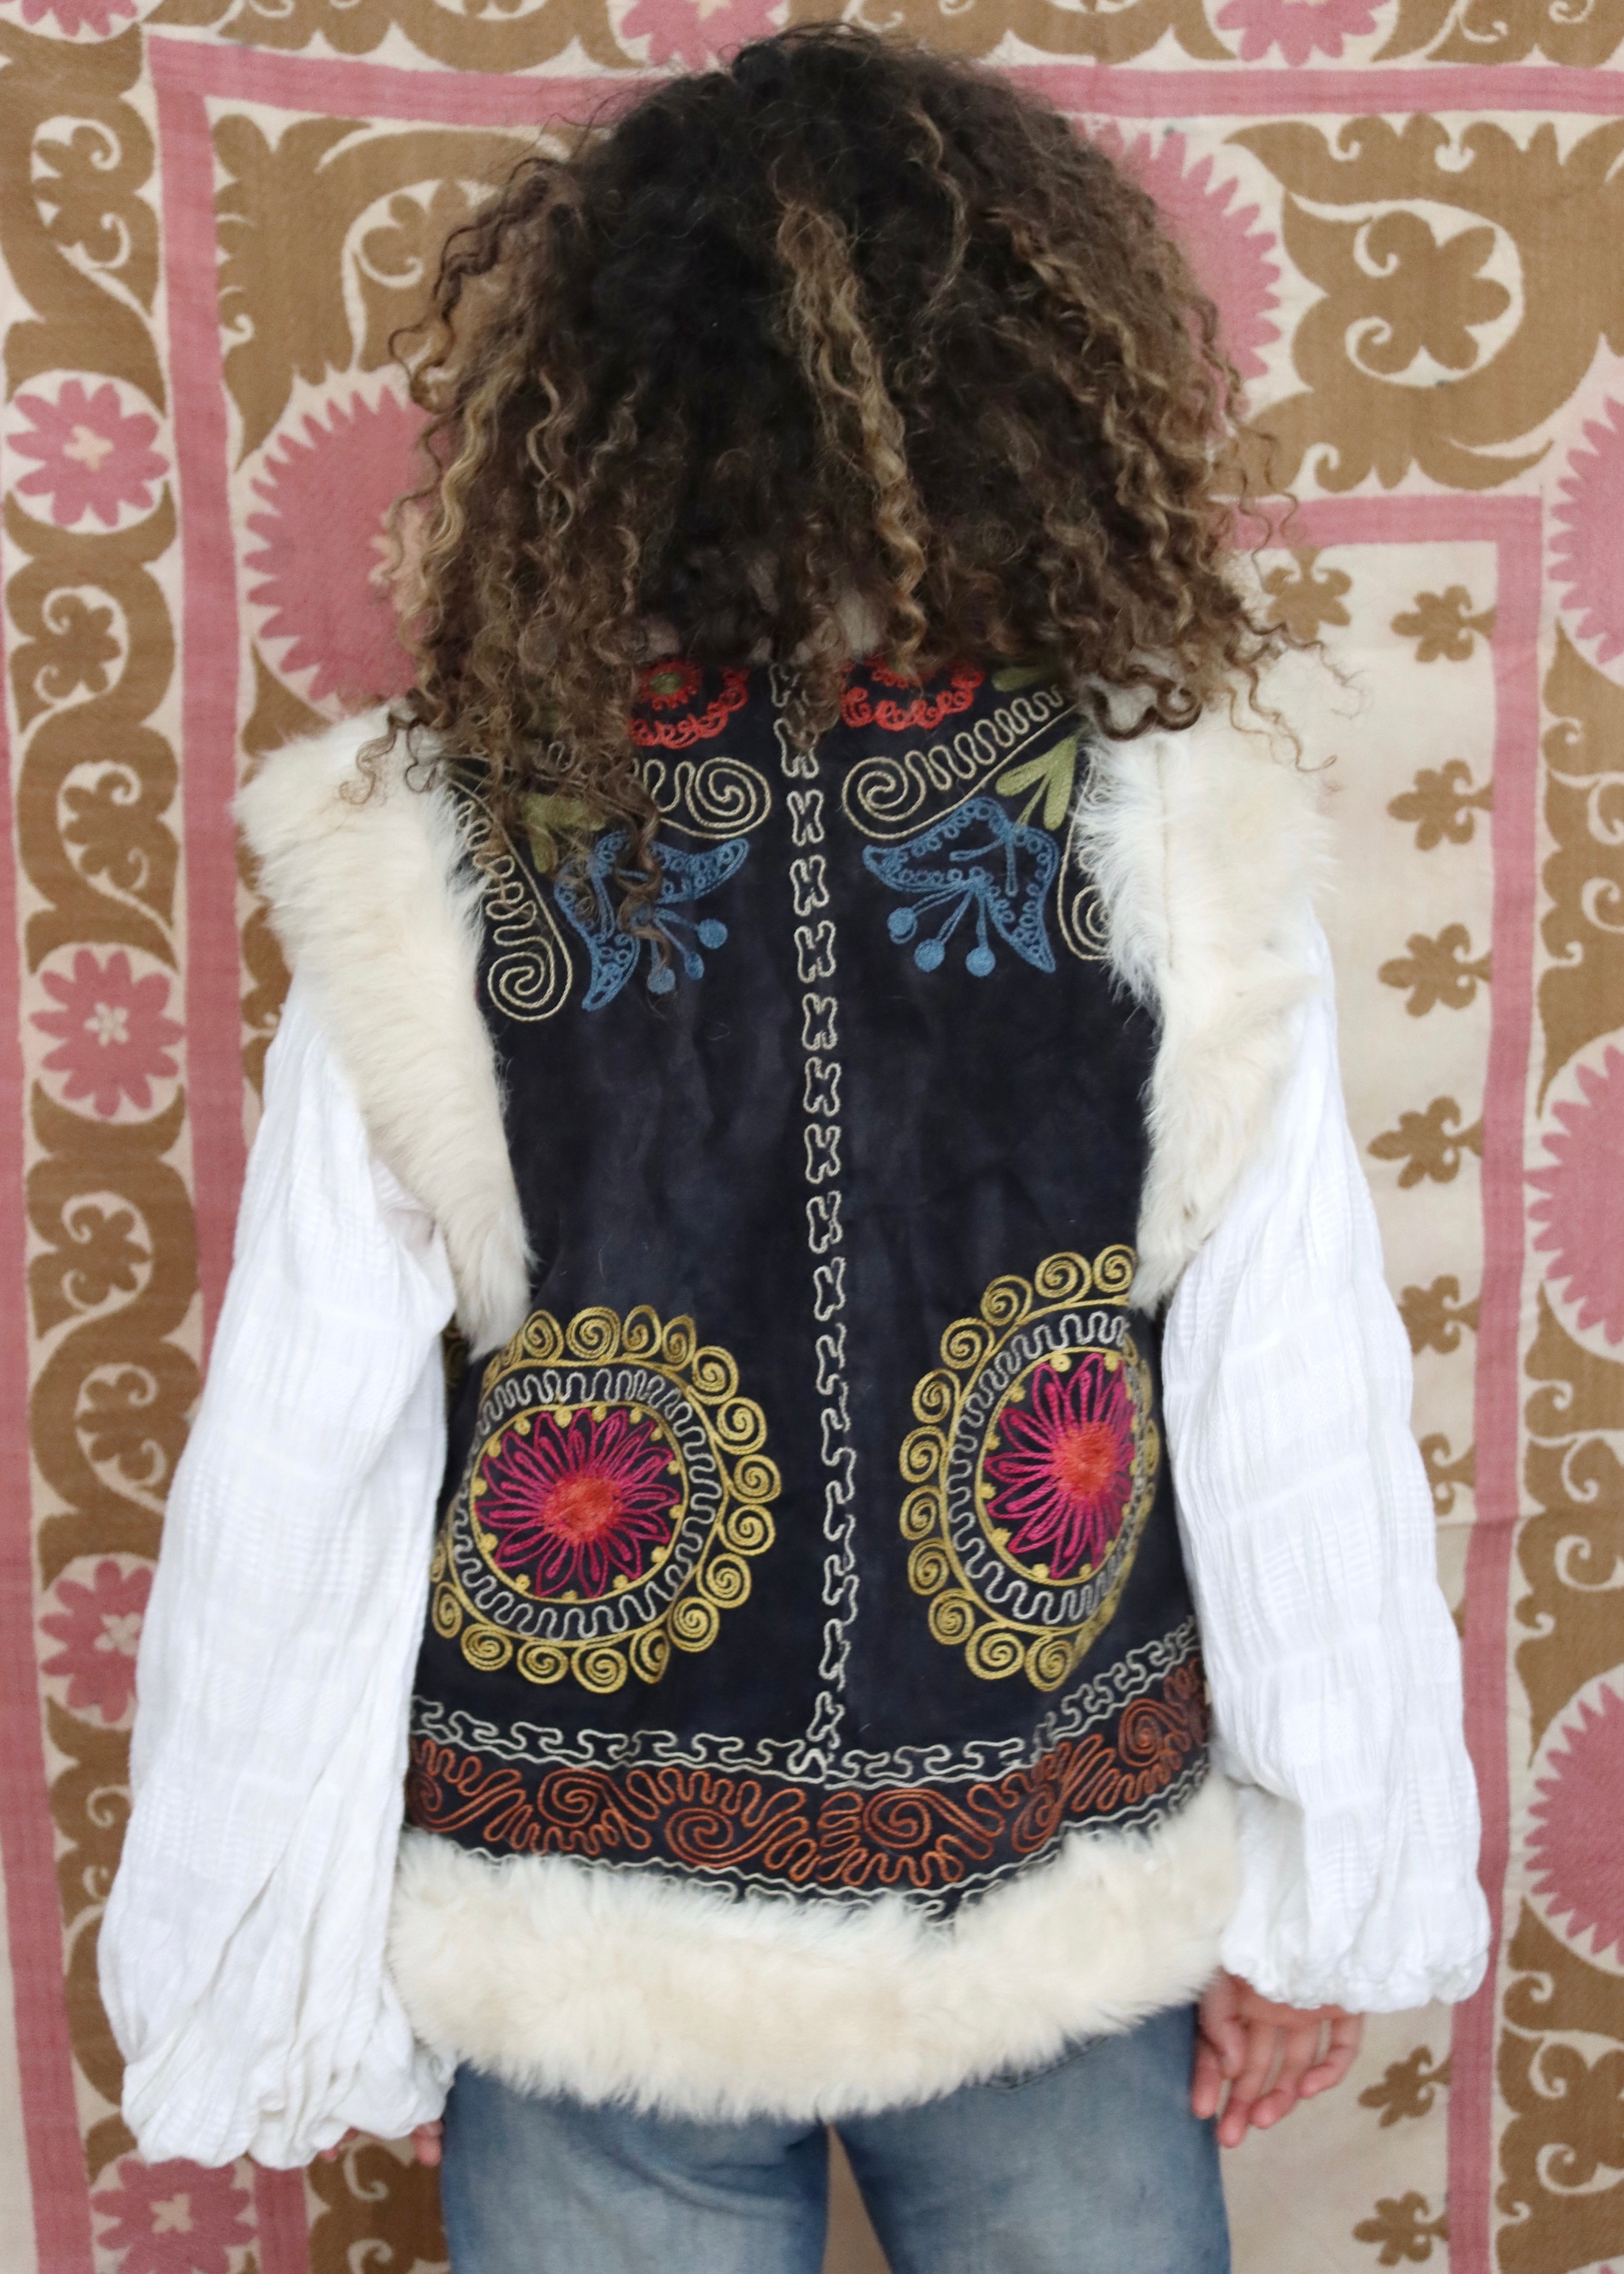 70's afghan dark grey winter fur vest with embroidery